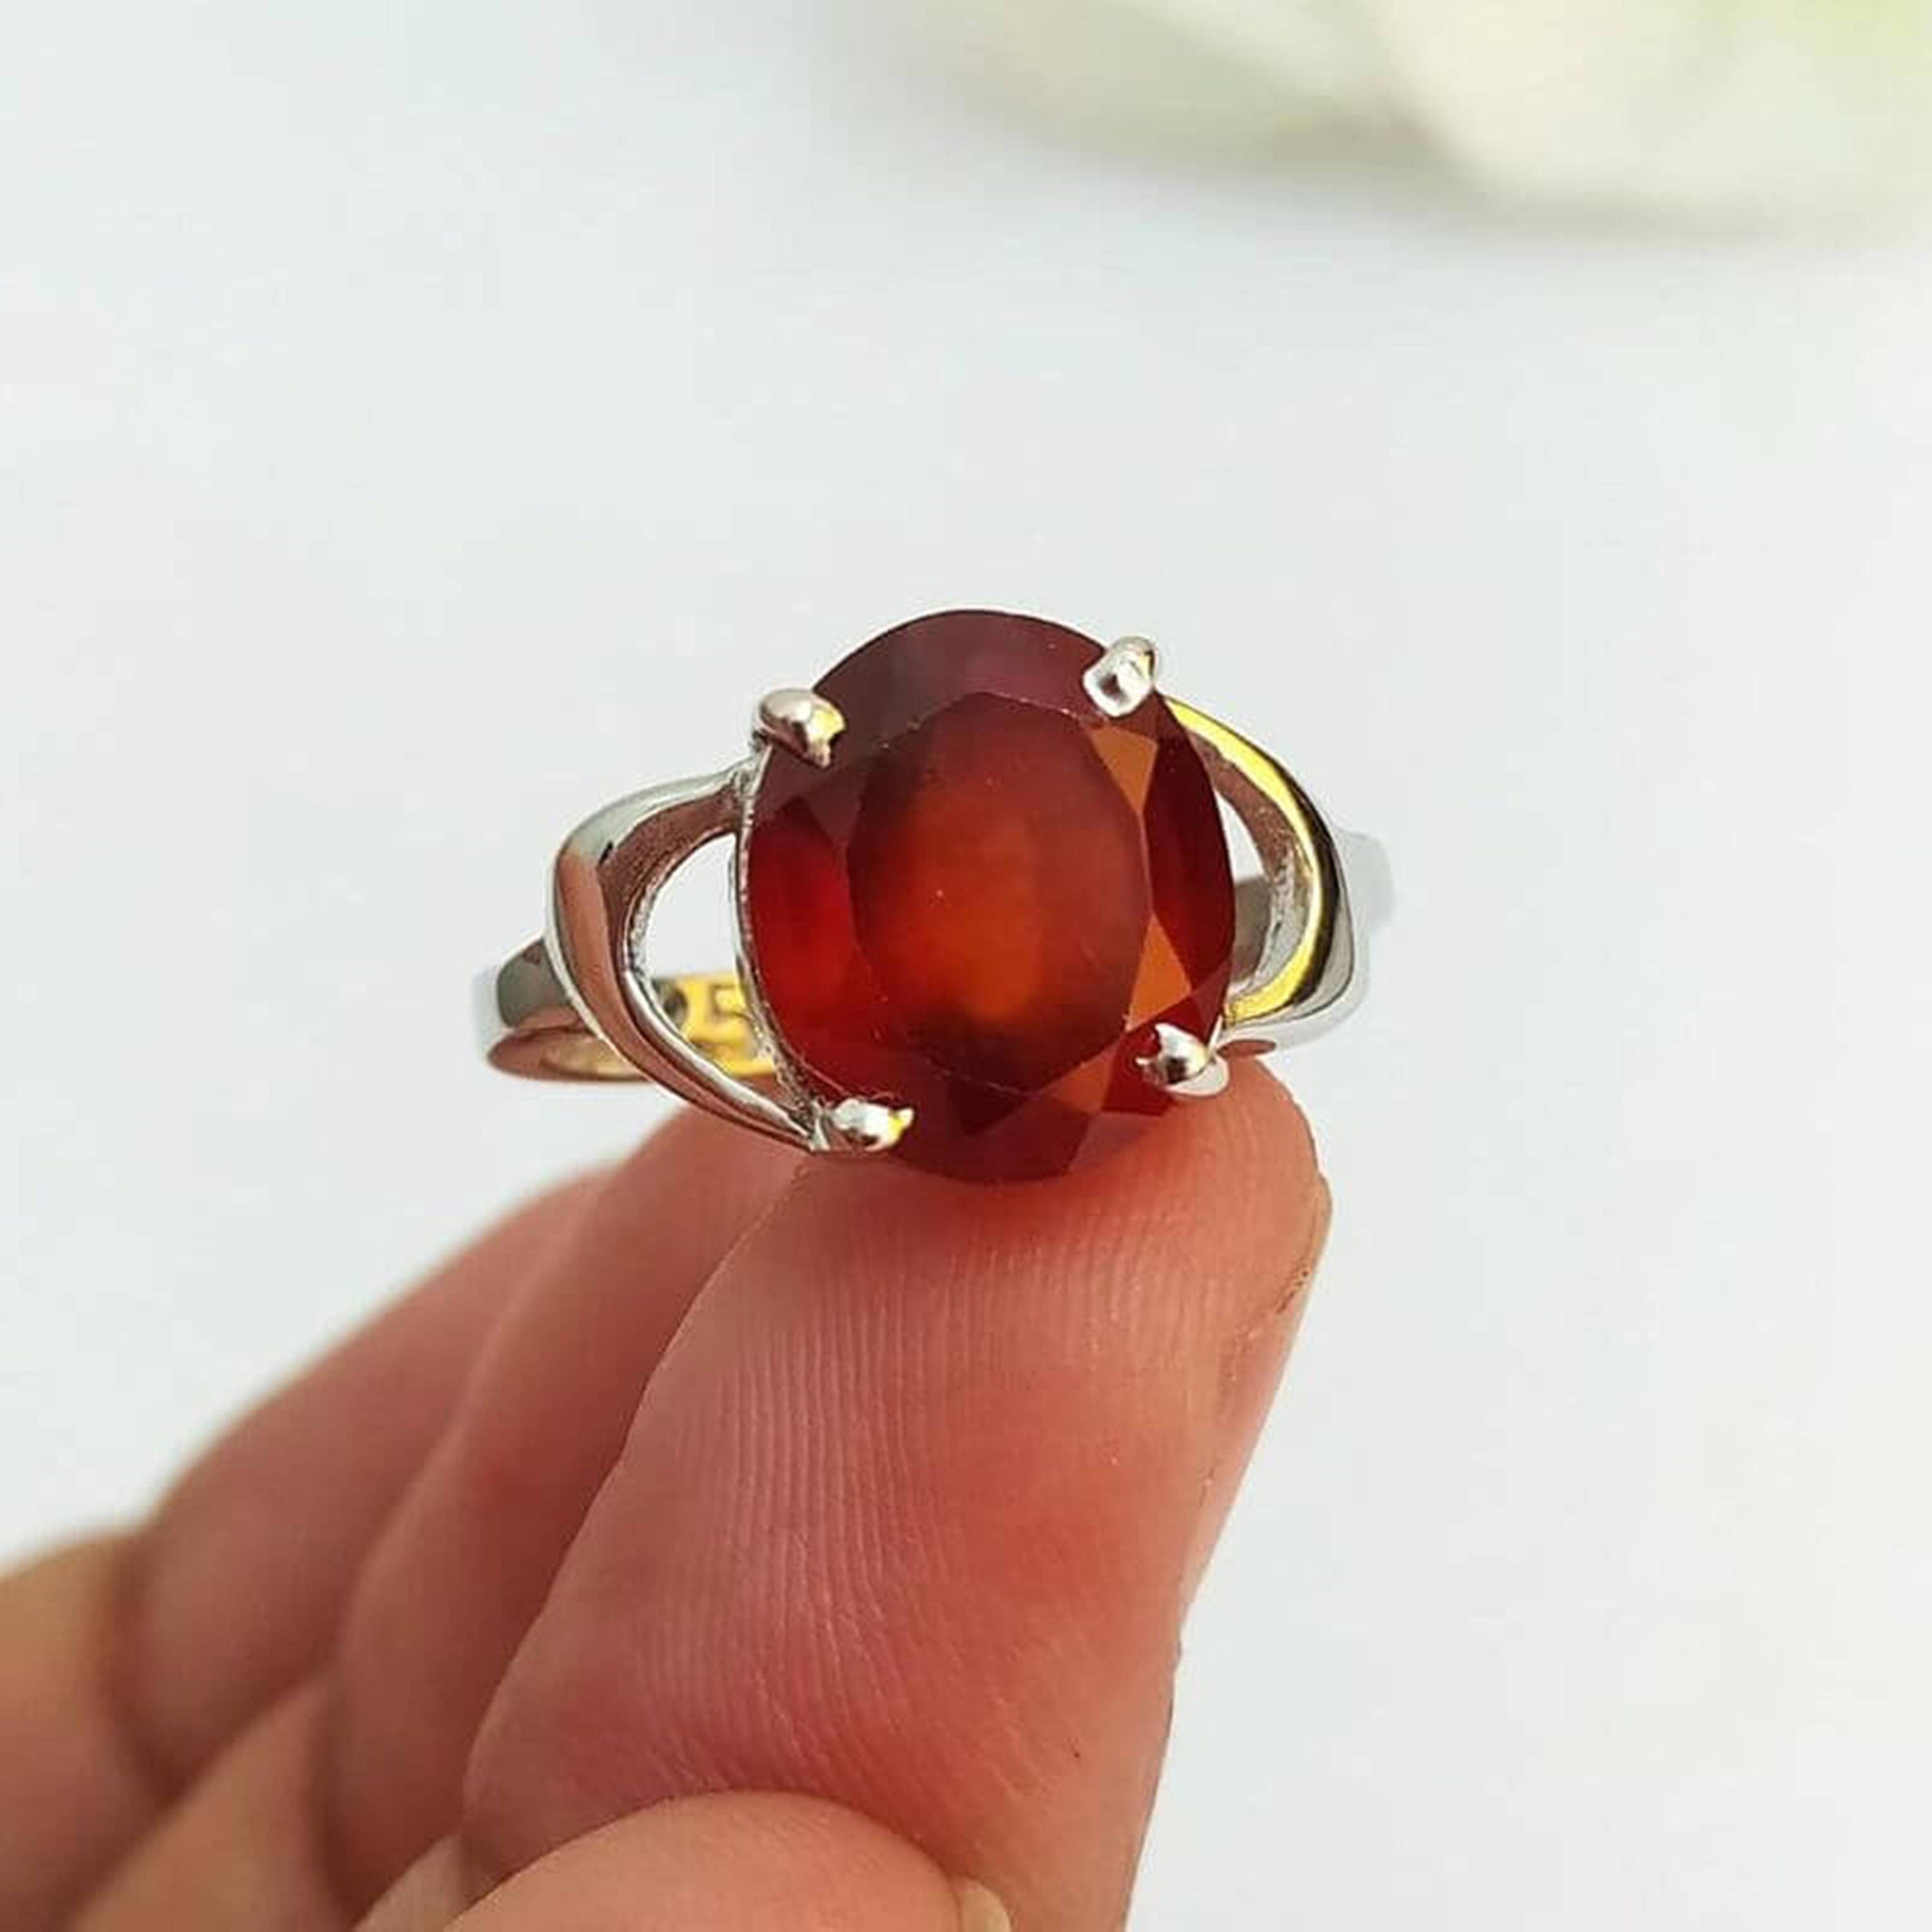 Silver Hessonite(Gomed) Stone Ring 8.25 carat by Ratan Bazaar: Buy Silver  Hessonite(Gomed) Stone Ring 8.25 carat by Ratan Bazaar Online in India on  Snapdeal